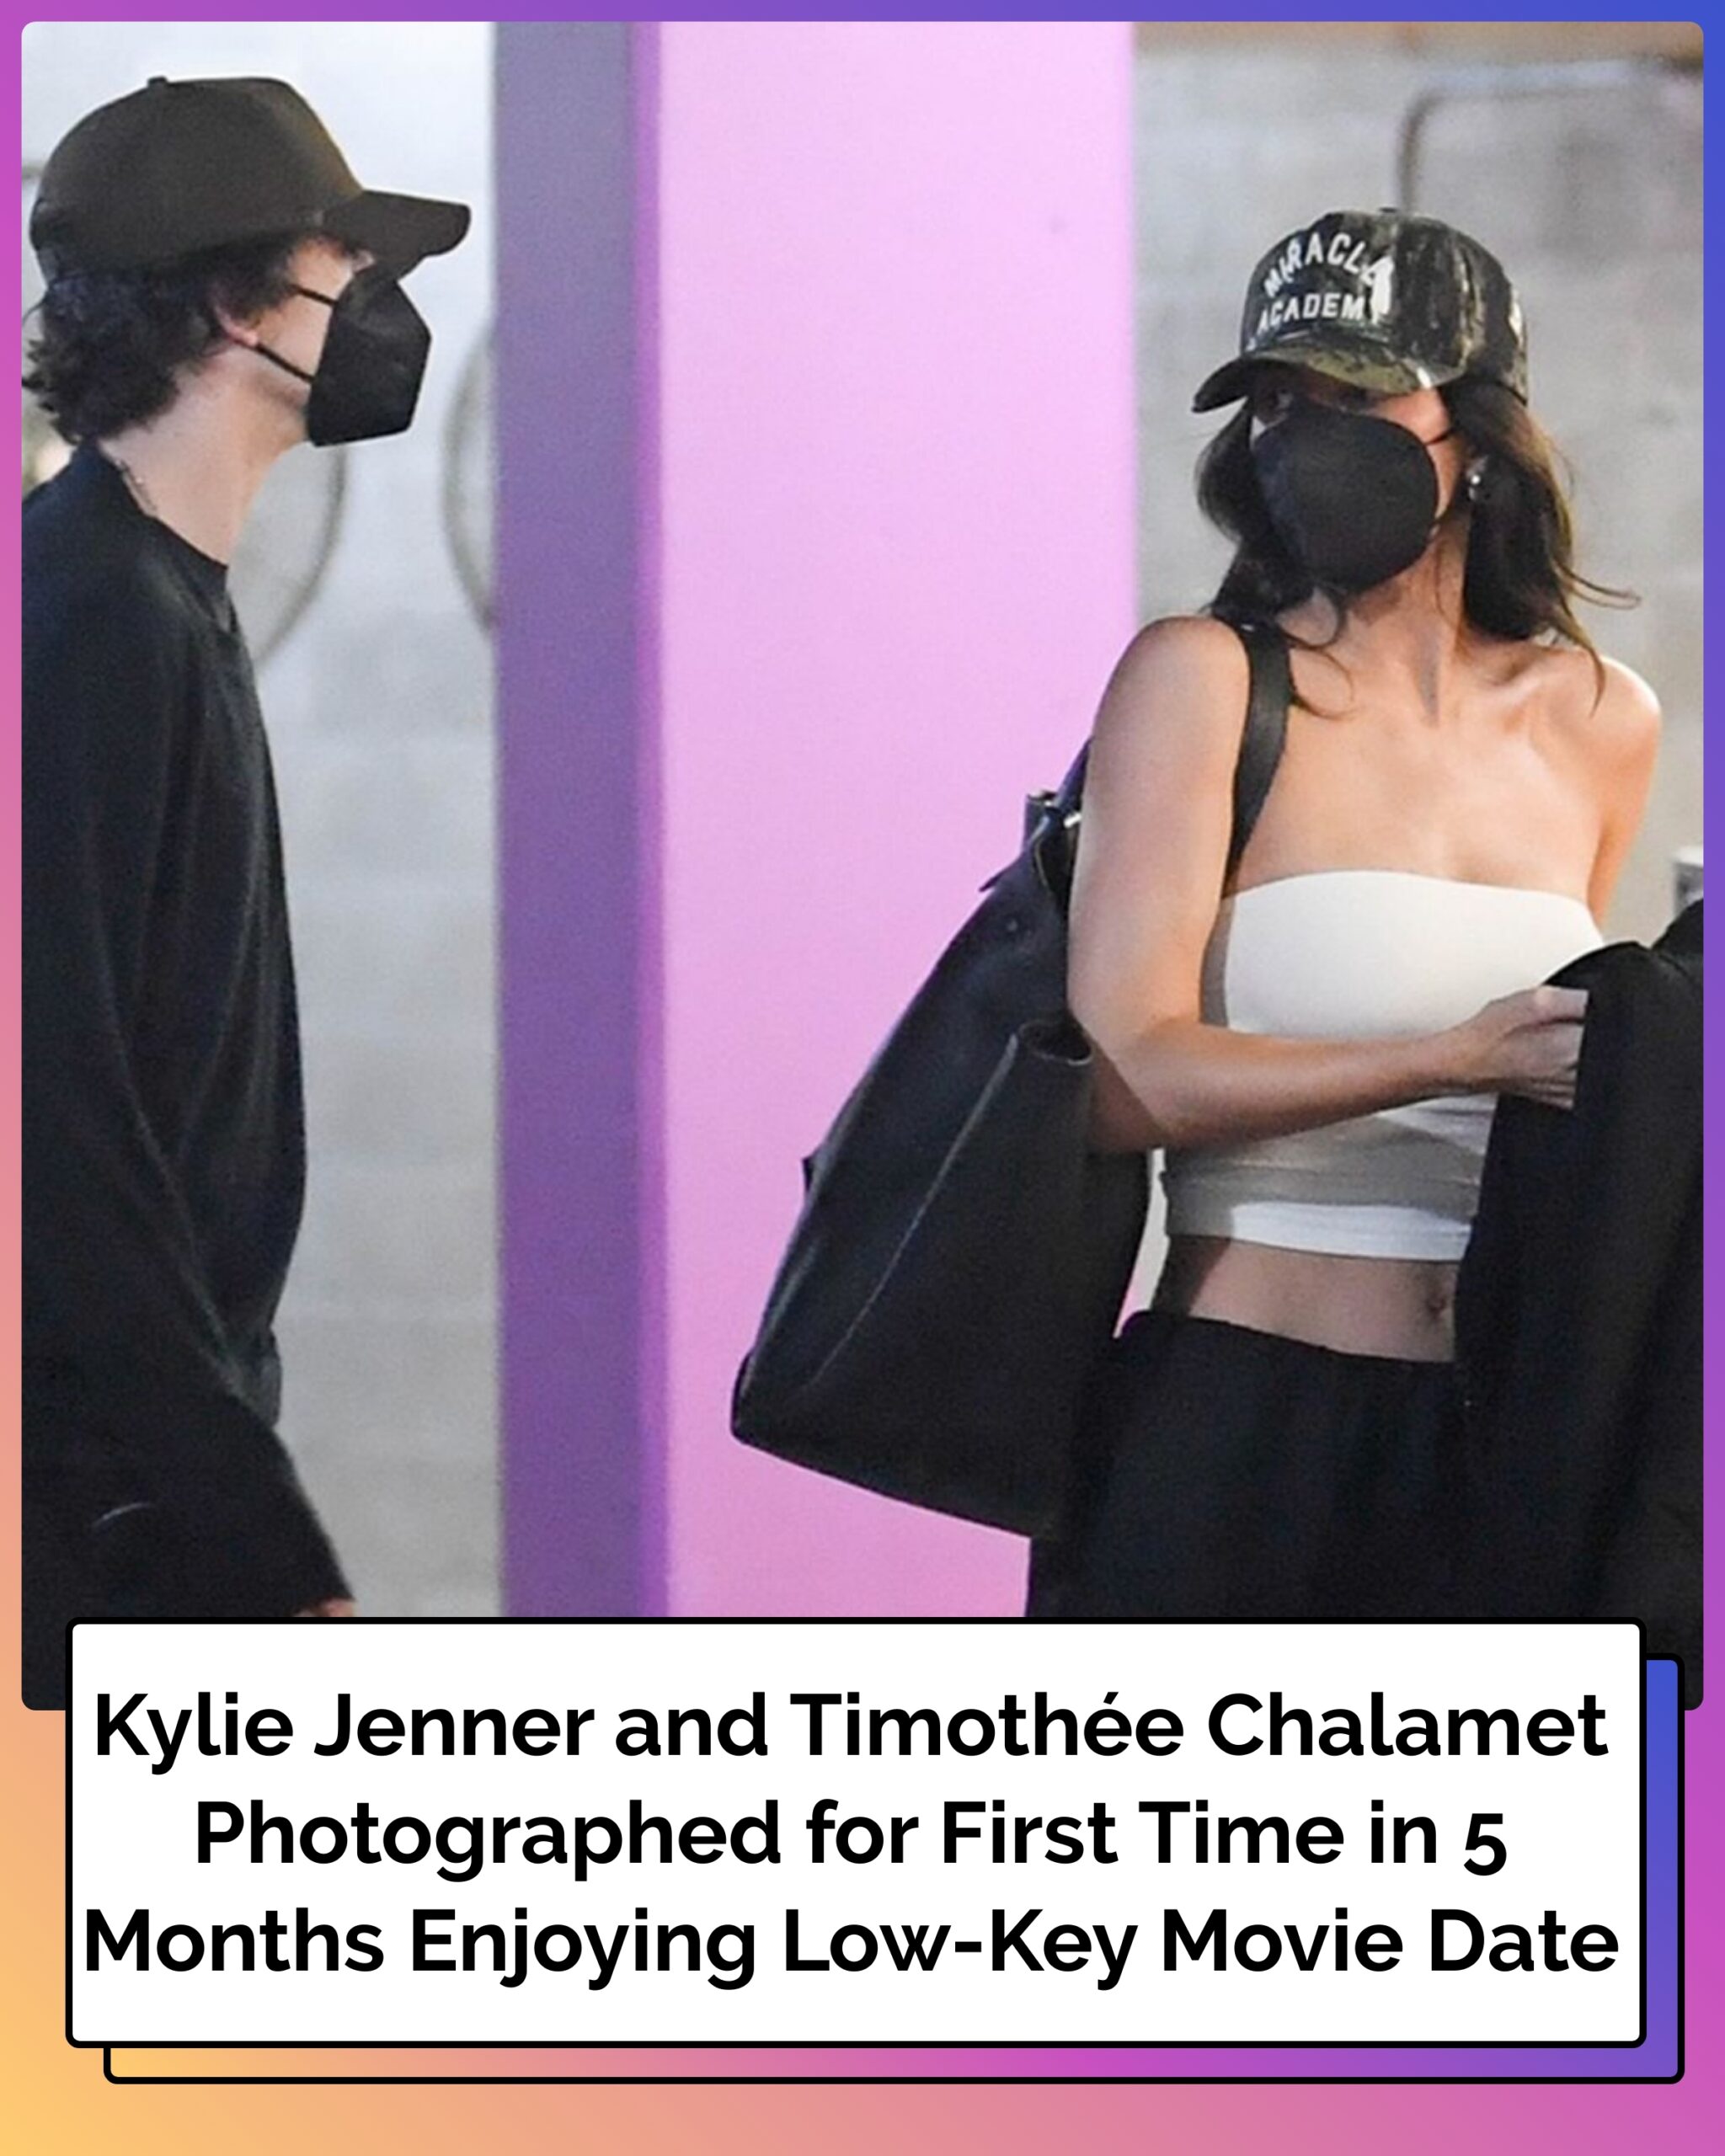 Kylie Jenner and Timothée Chalamet Photographed for First Time in 5 Months Enjoying Low-Key Movie Date